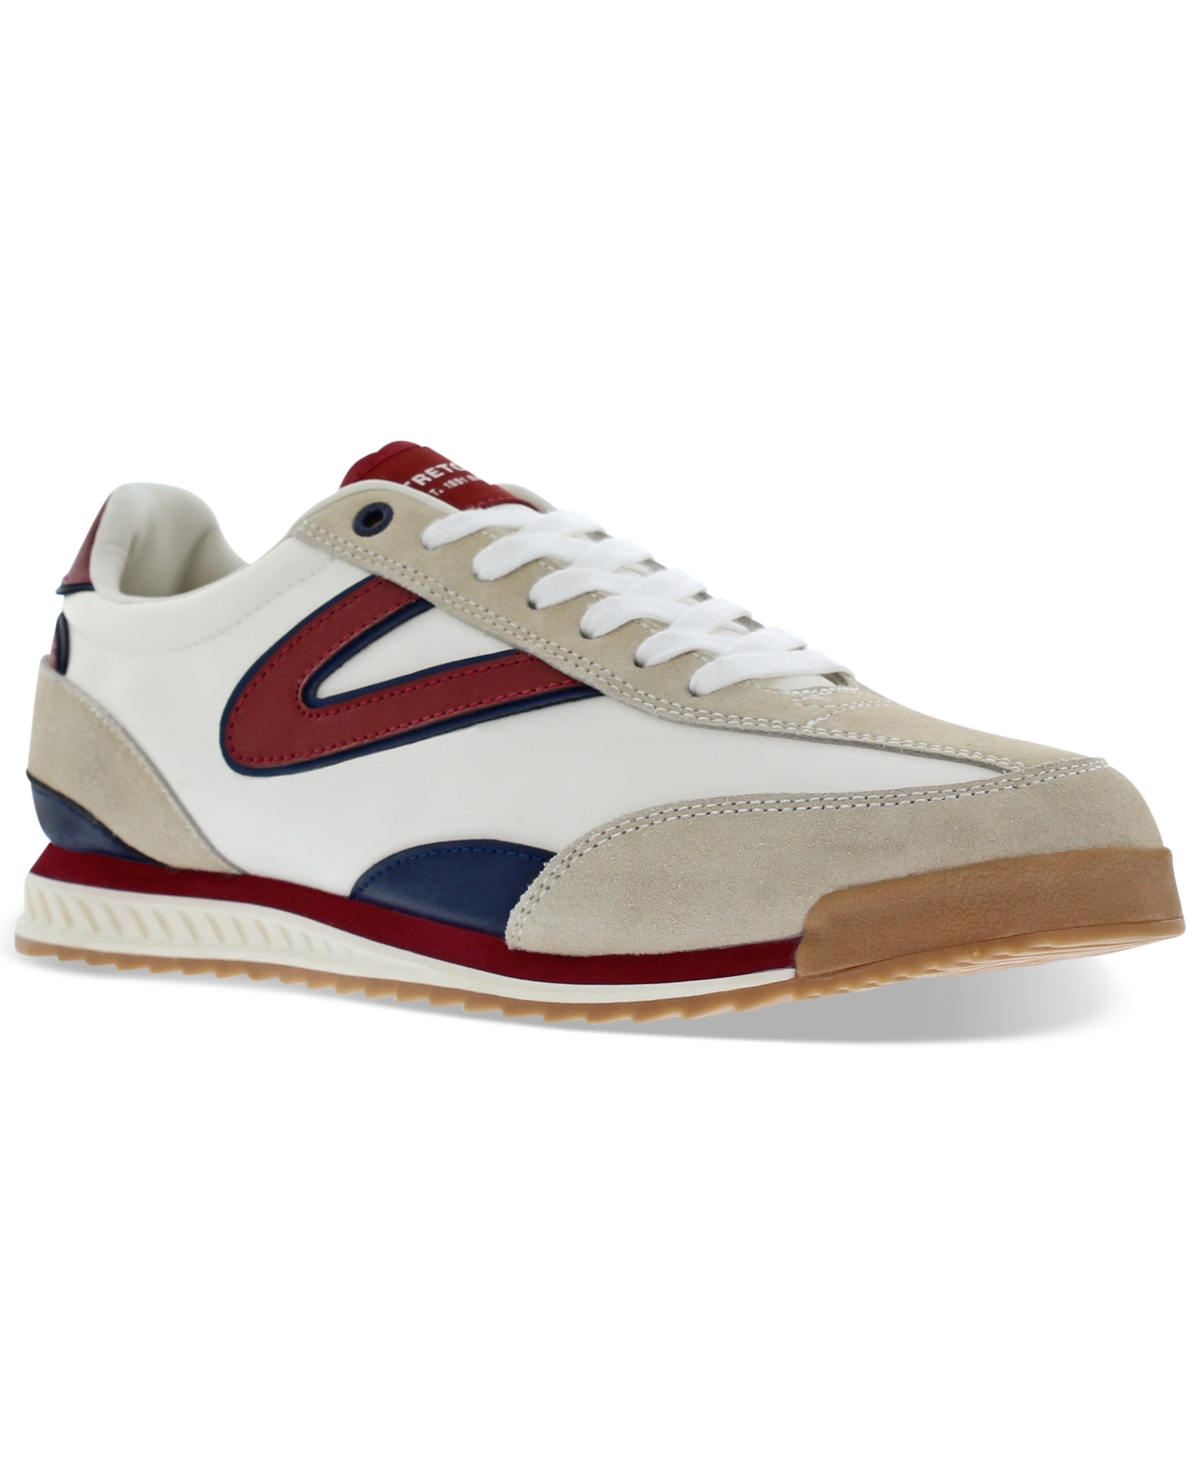 Men's Rawlins Elite Casual Sneakers from Finish Line - White/red